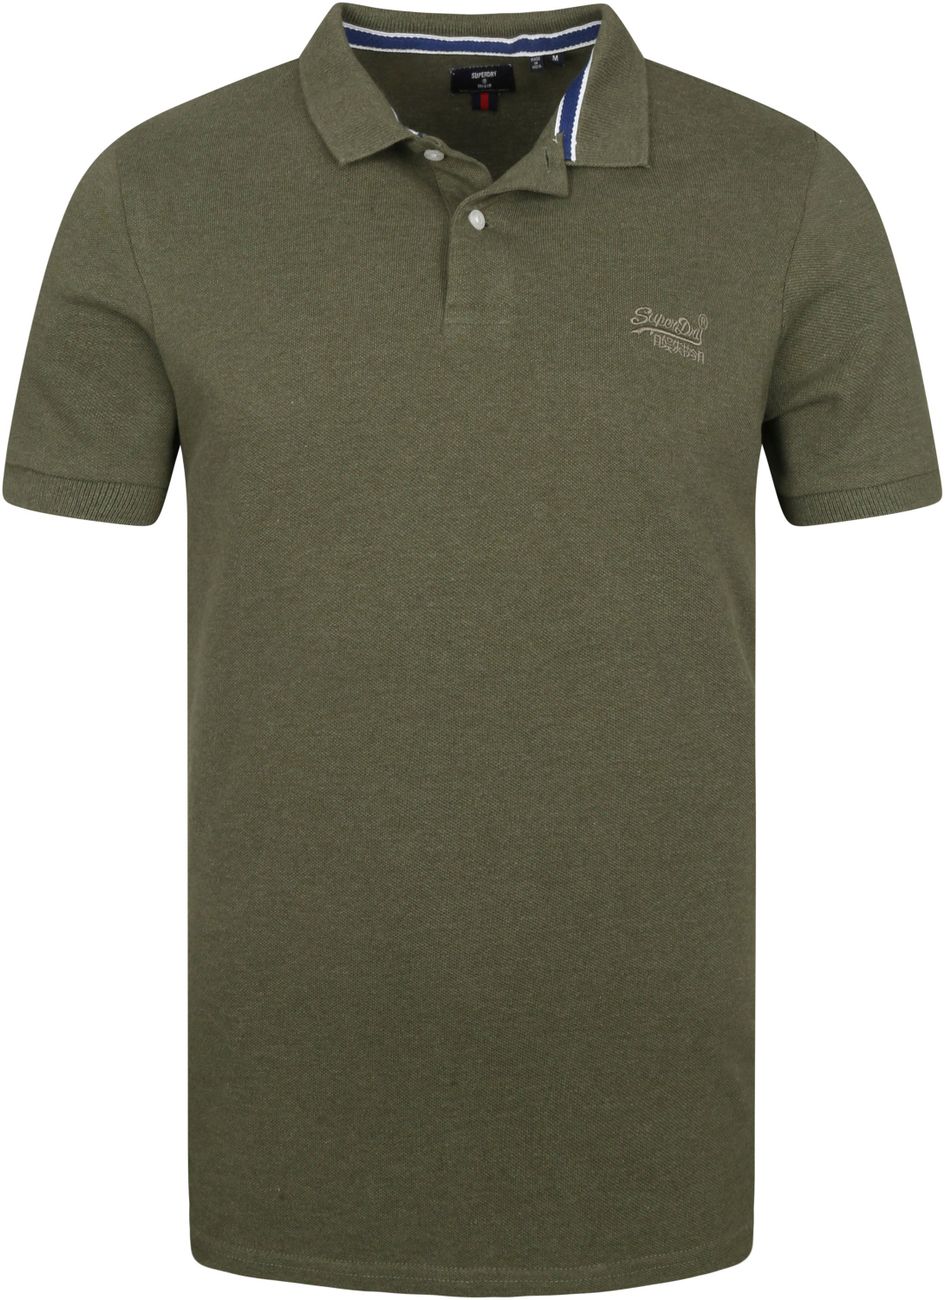 CLASSIC SUPERDRY Noels – POLO Menswear GREEN PIQUE